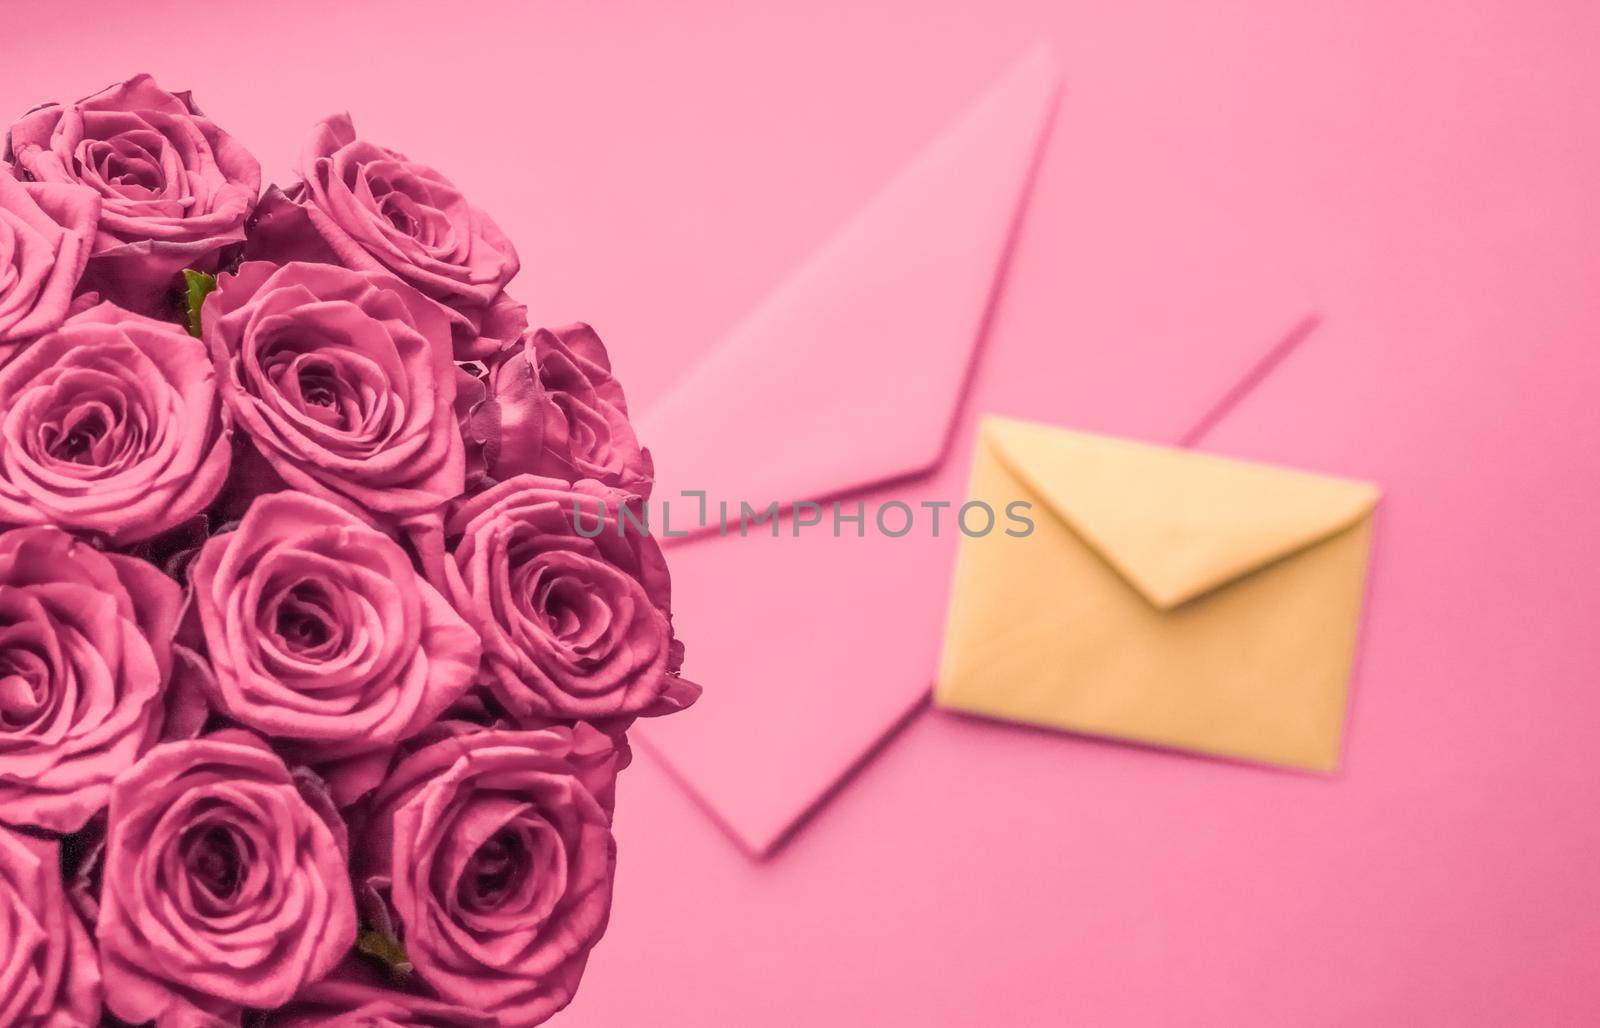 Holidays gift, floral present and happy relationship concept - Holiday love letter and flowers delivery, luxury bouquet of roses and card on blush pink background for romantic holiday design